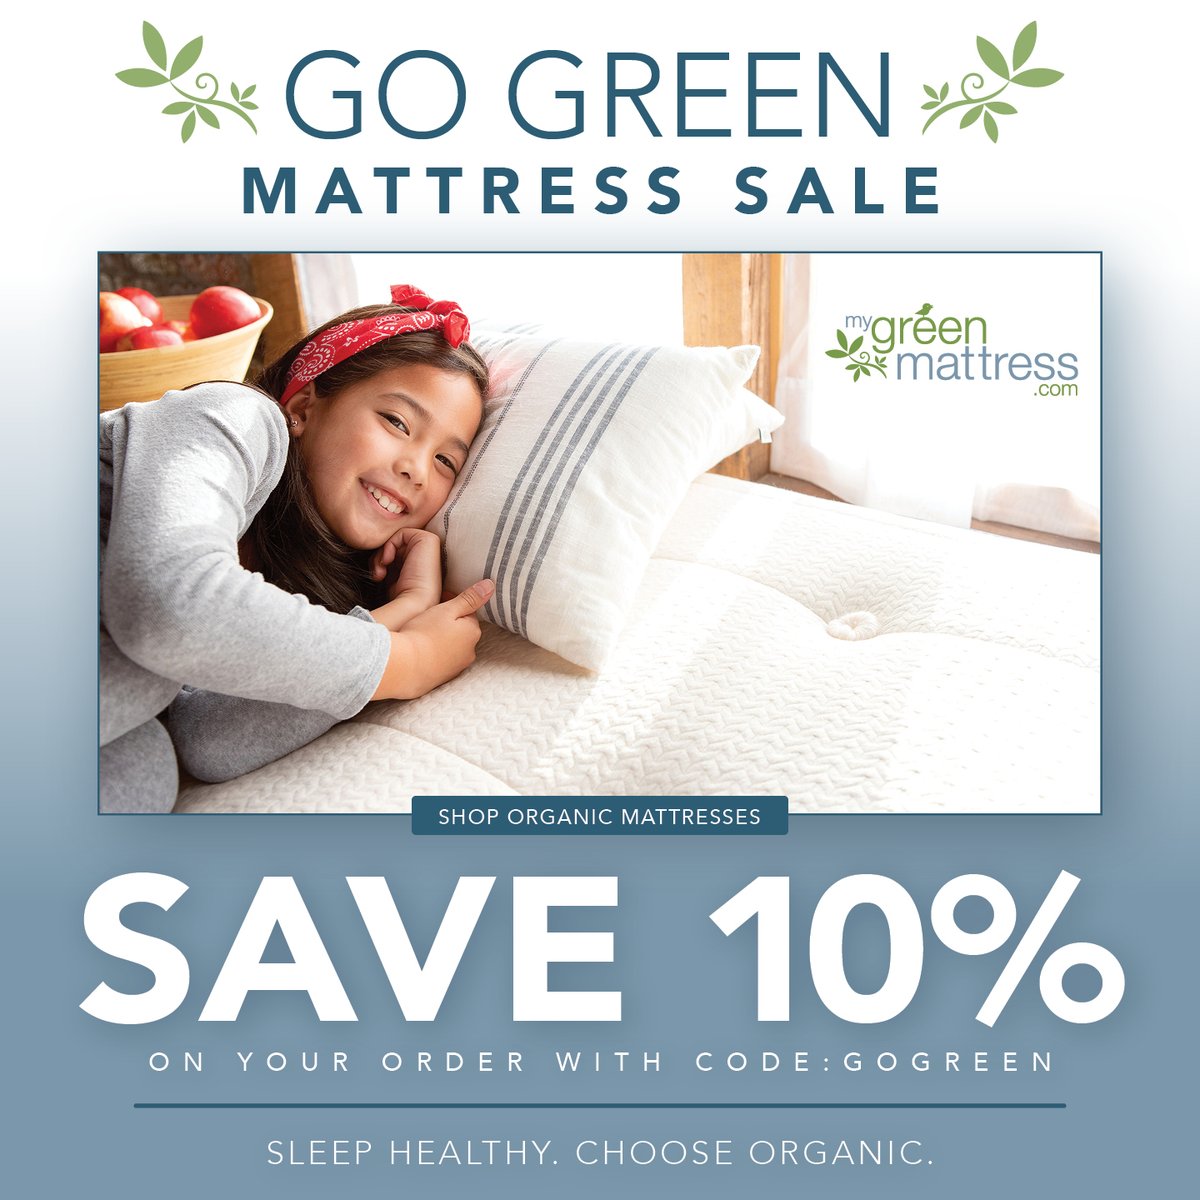 Perfect Sunday mornings ahead ... choose healthy, organic mattresses for your whole family and SAVE 10% on Your Order with code: GoGreen